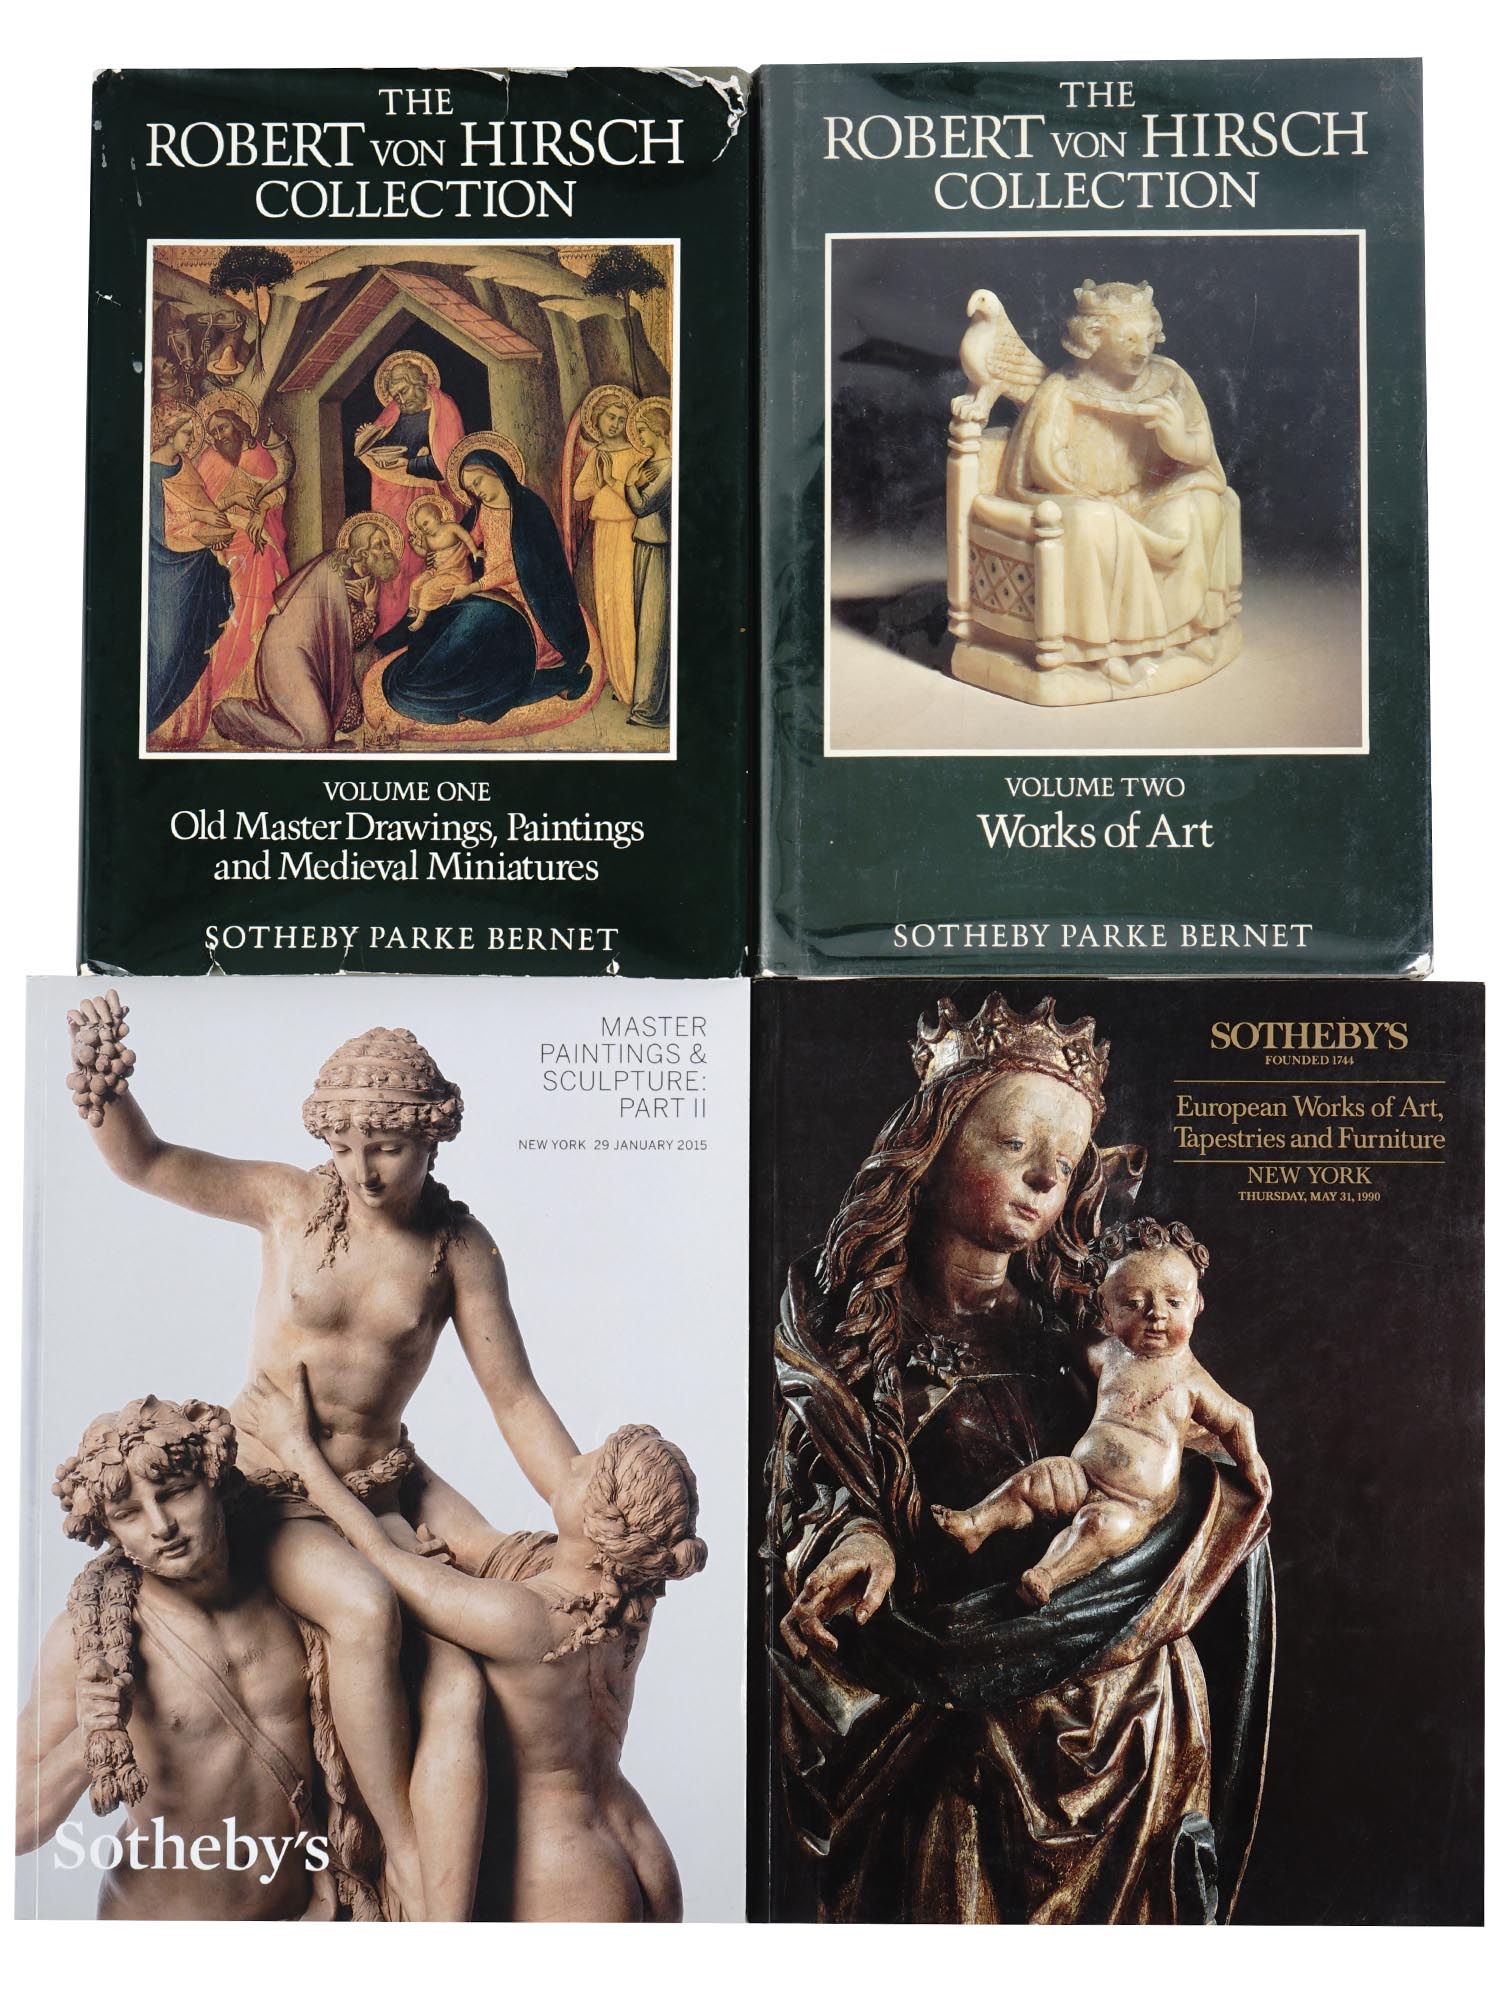 HIRSCH COLLECTION ART BOOKS AND AUCTION CATALOGS PIC-1